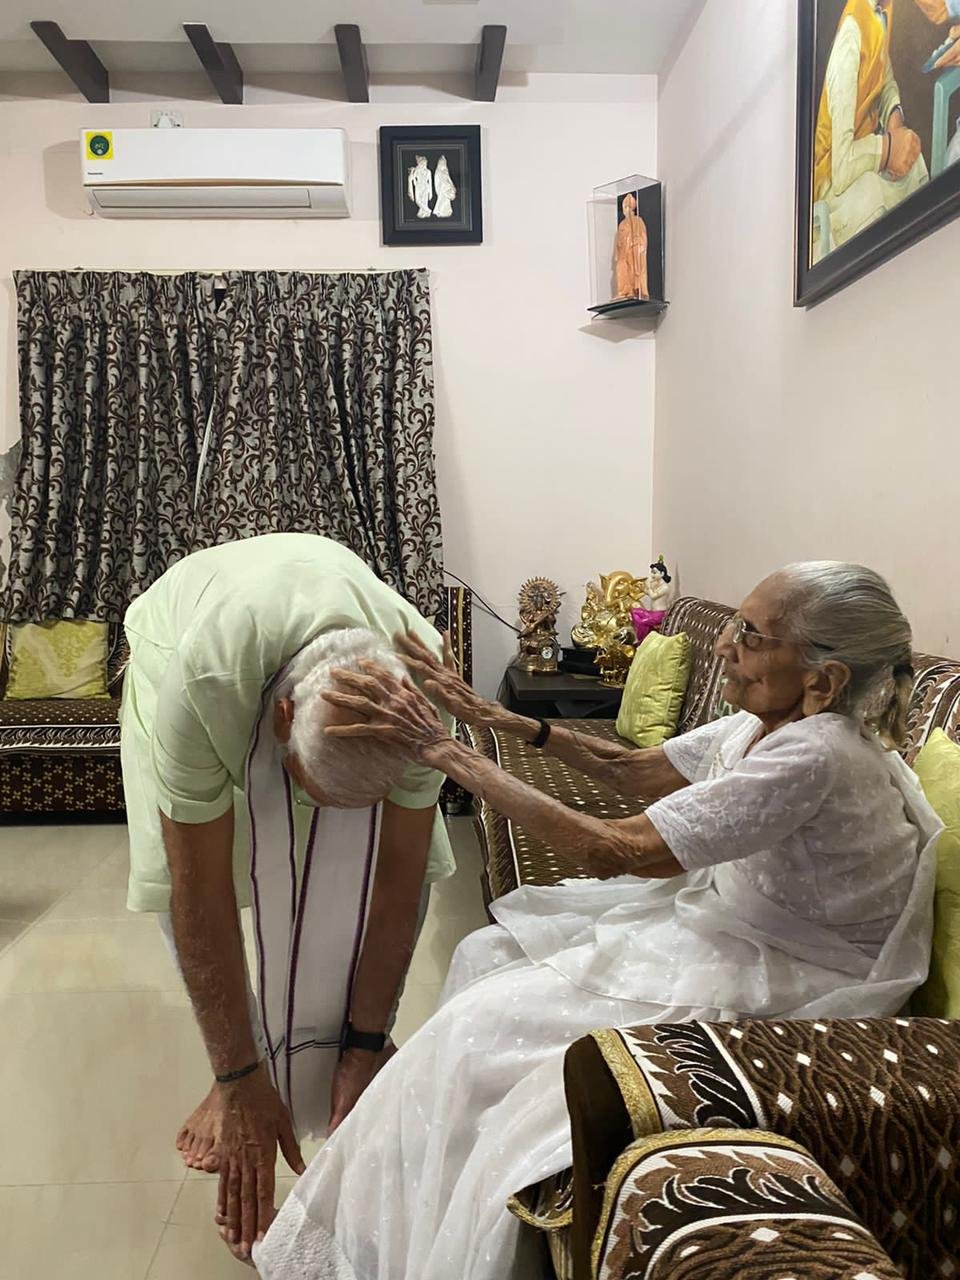 PM Modi Meet his mother hriaba as she enters her 100th year